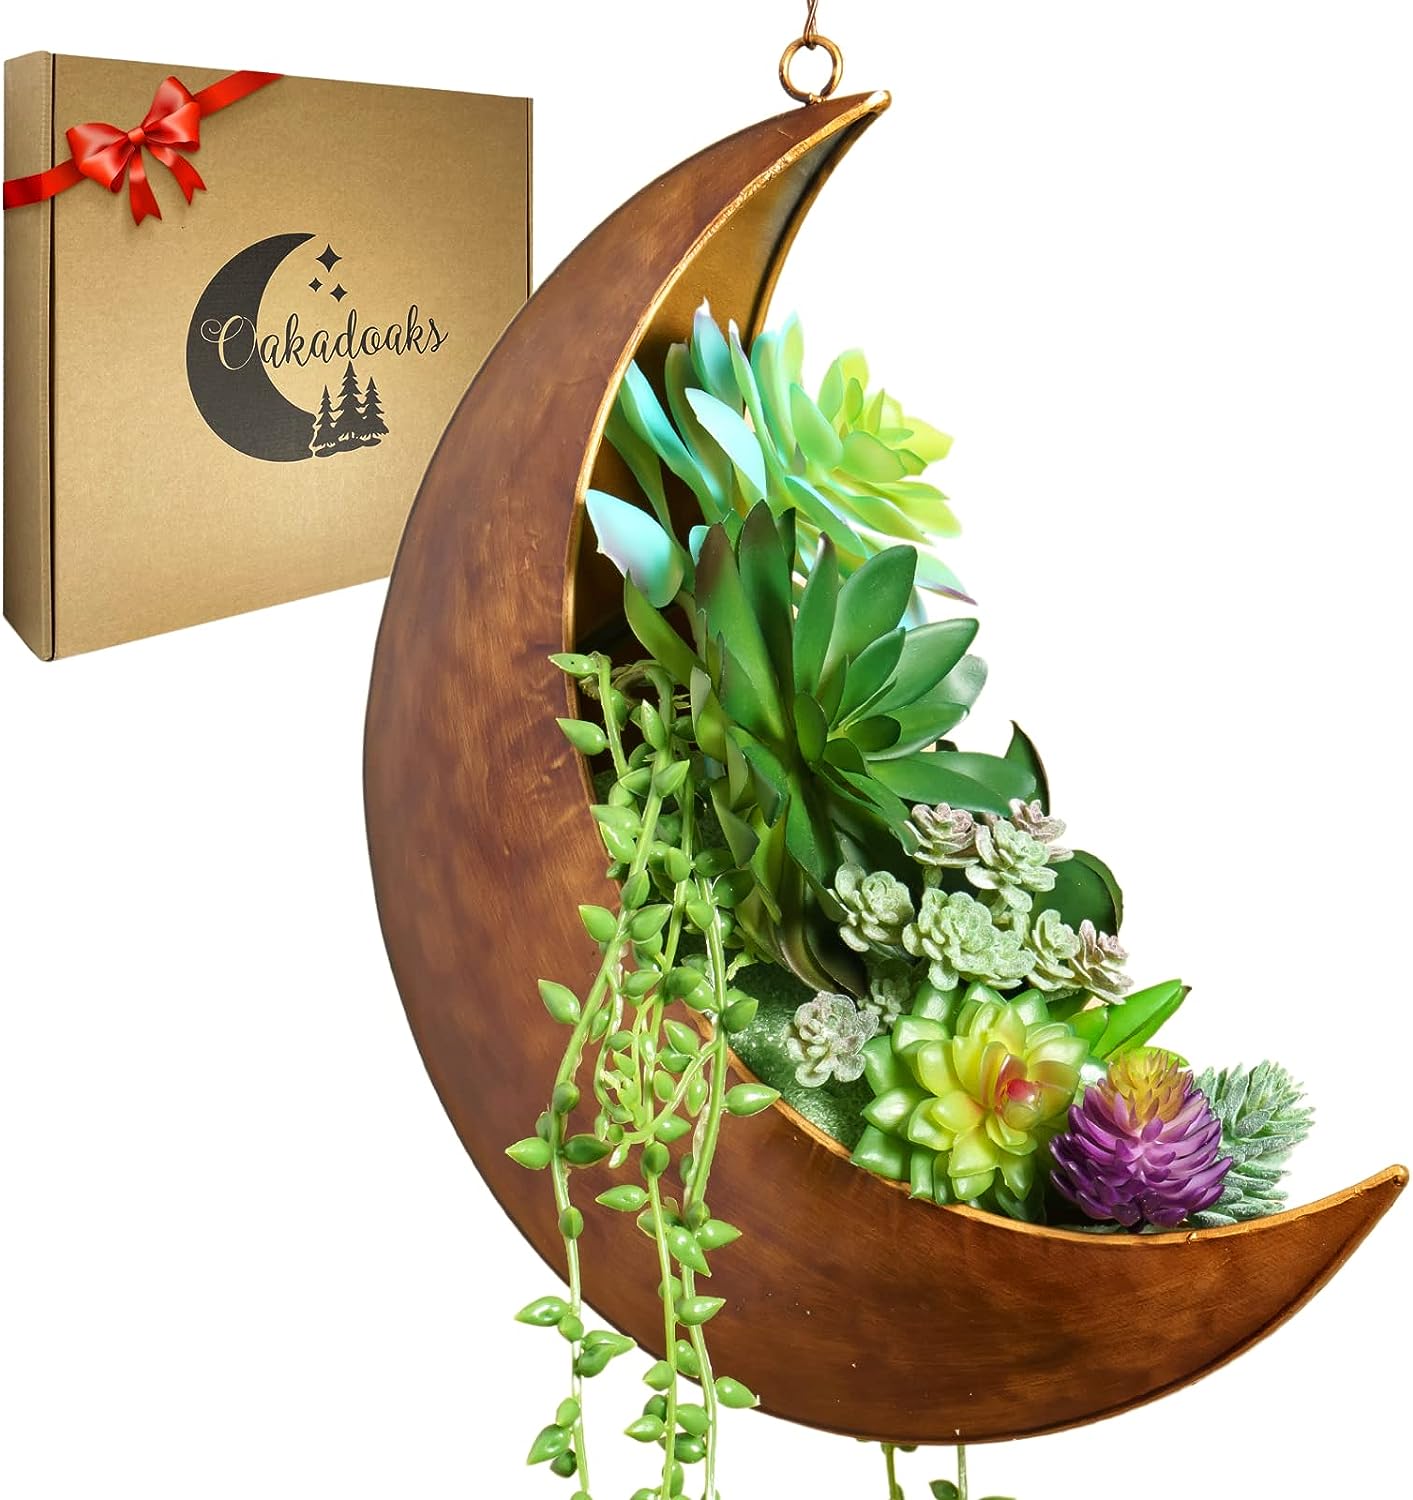 Oakadoaks Hanging Moon Planter for Moon Room Decor Great for Succulents,Air Plant,Mini Cactus,Faux,Artificial Plants-12” Boho Rustic Metal Planters,Gifts for Women,Birthdays,Nursery